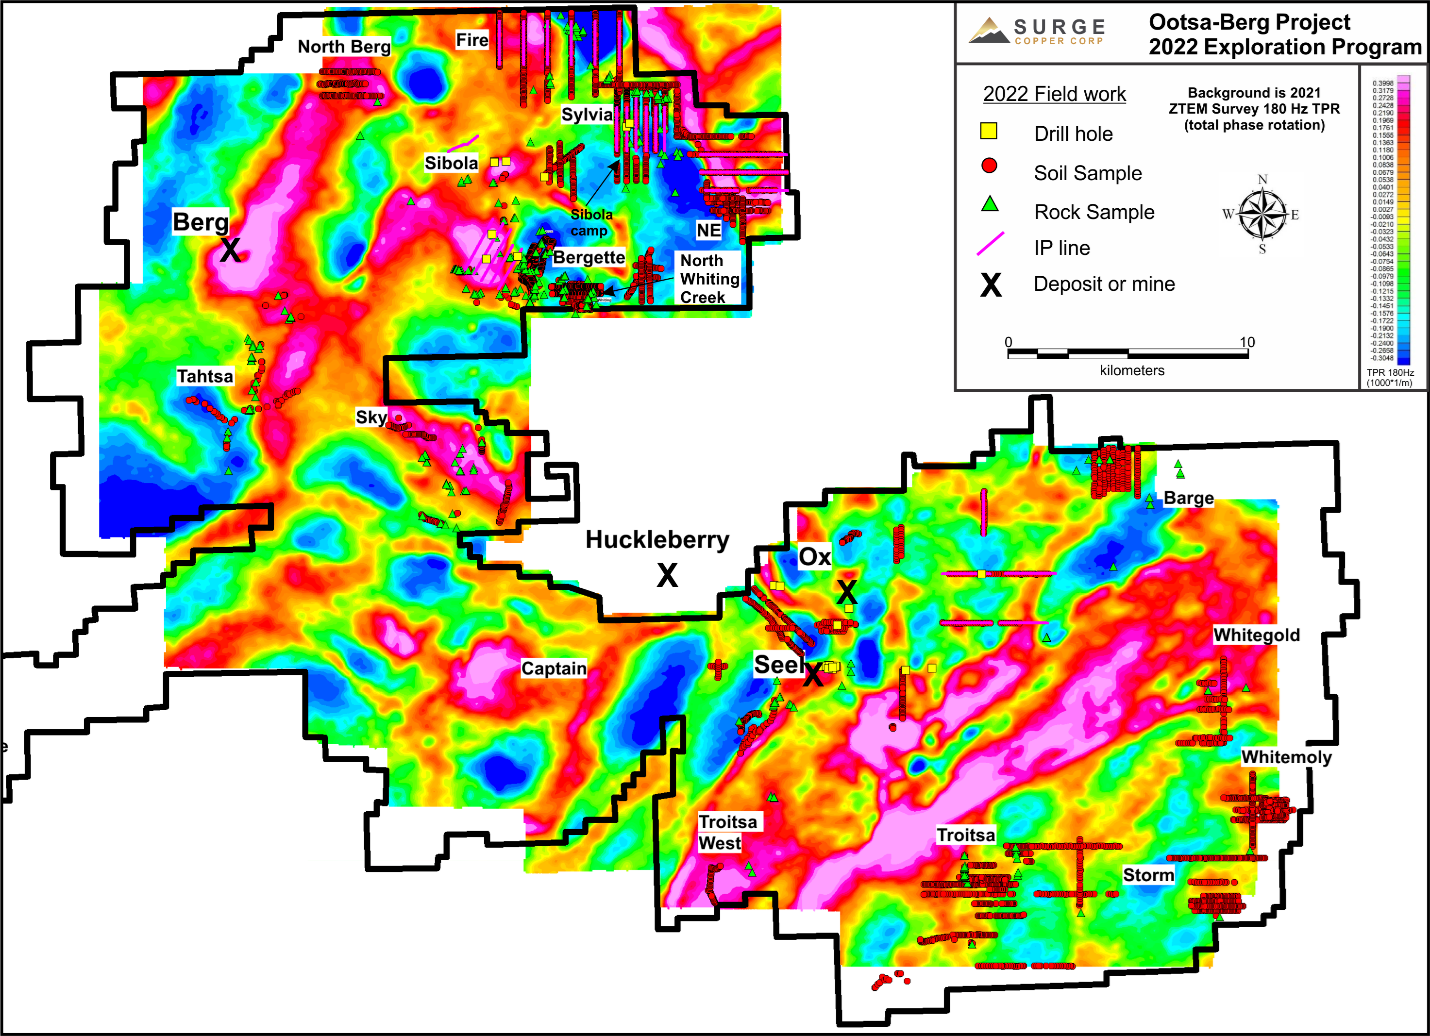 Summary map showing 2022 exploration work on the Ootsa-Berg project overlain on ZTEM 180 HZ Total Phase Rotation map.